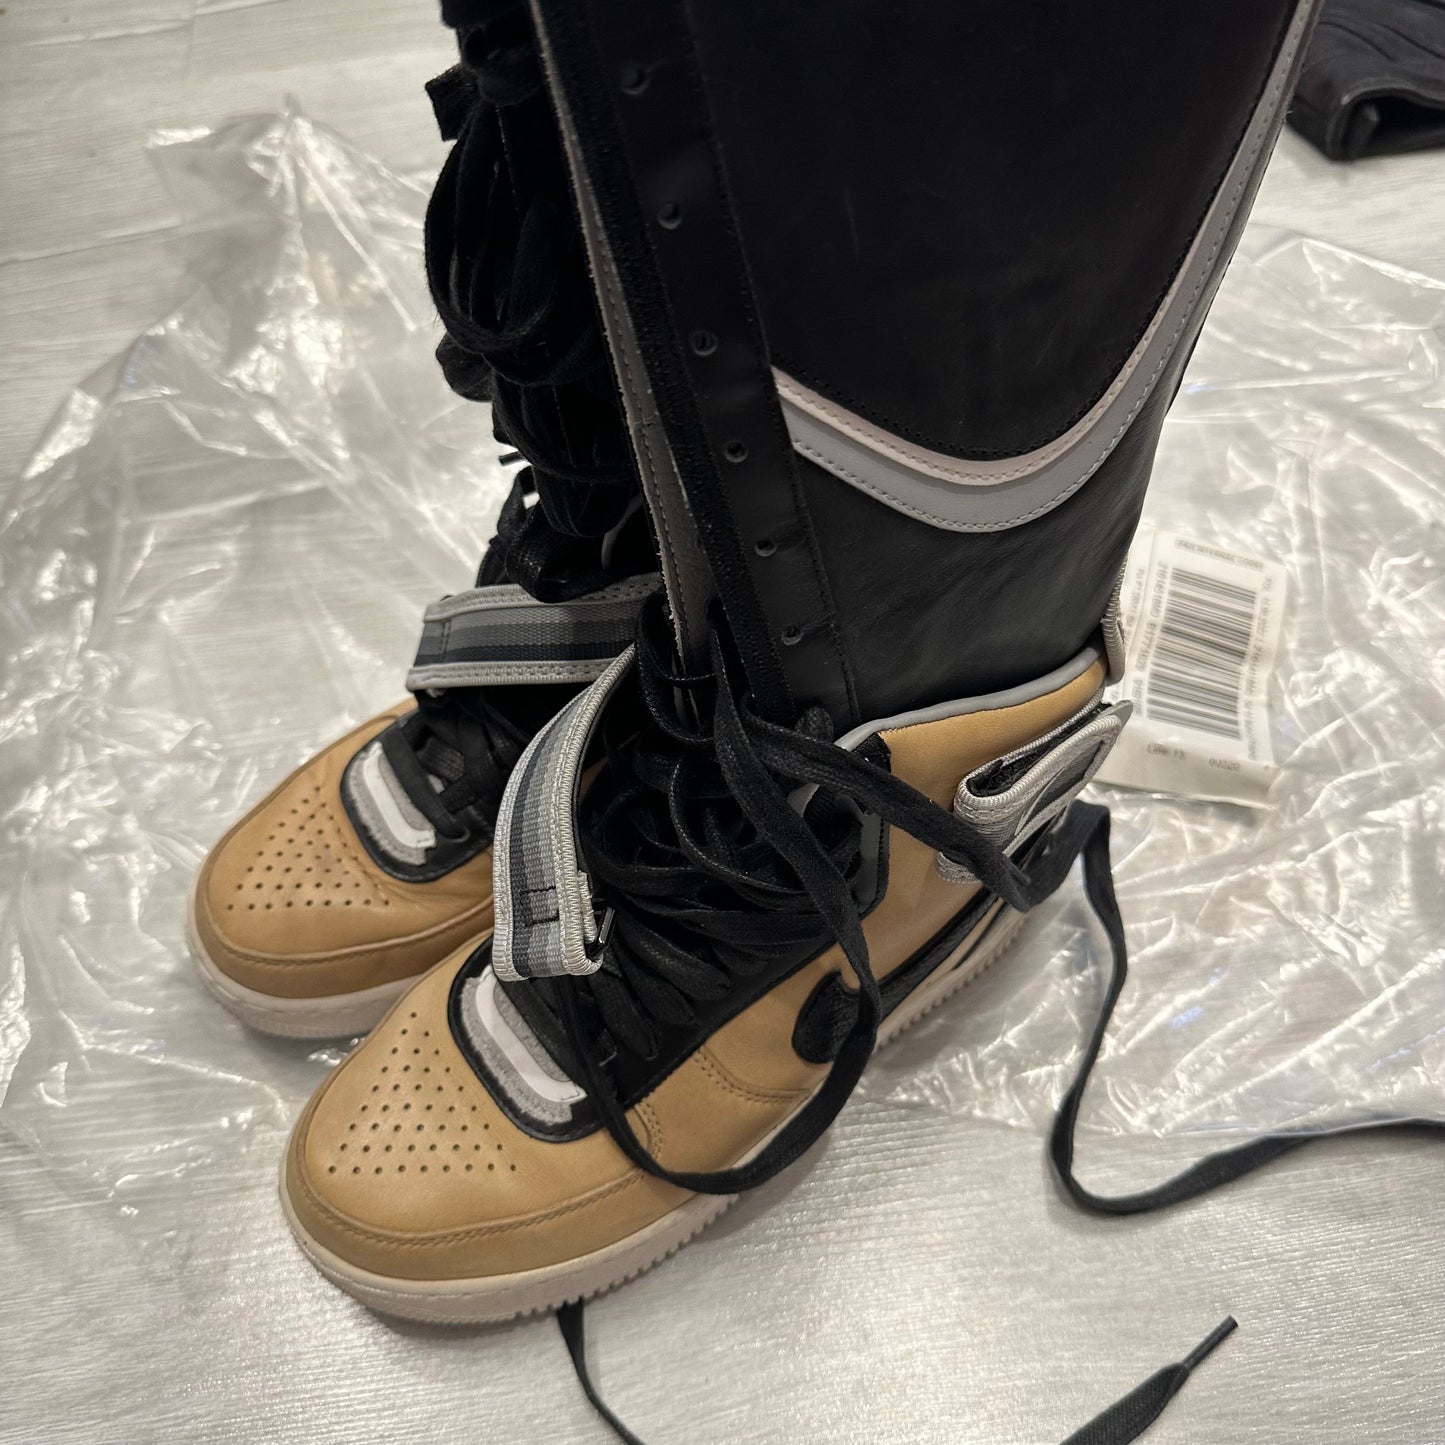 Nike x Ricardo Tisci Knee High Sneaker Lace Up Boots 36